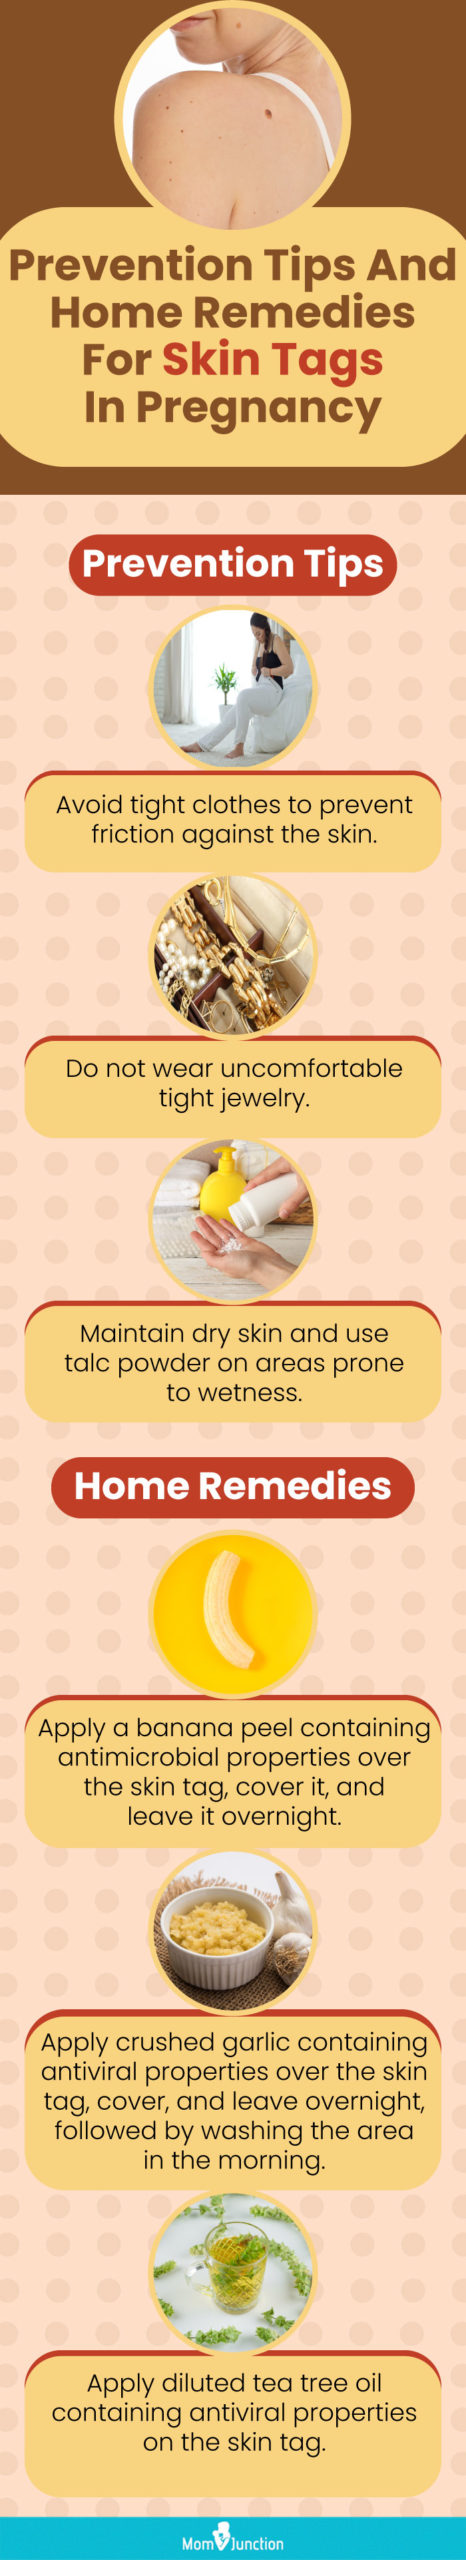 prevention tips and home remedies for skin tags in pregnancy (infographic)